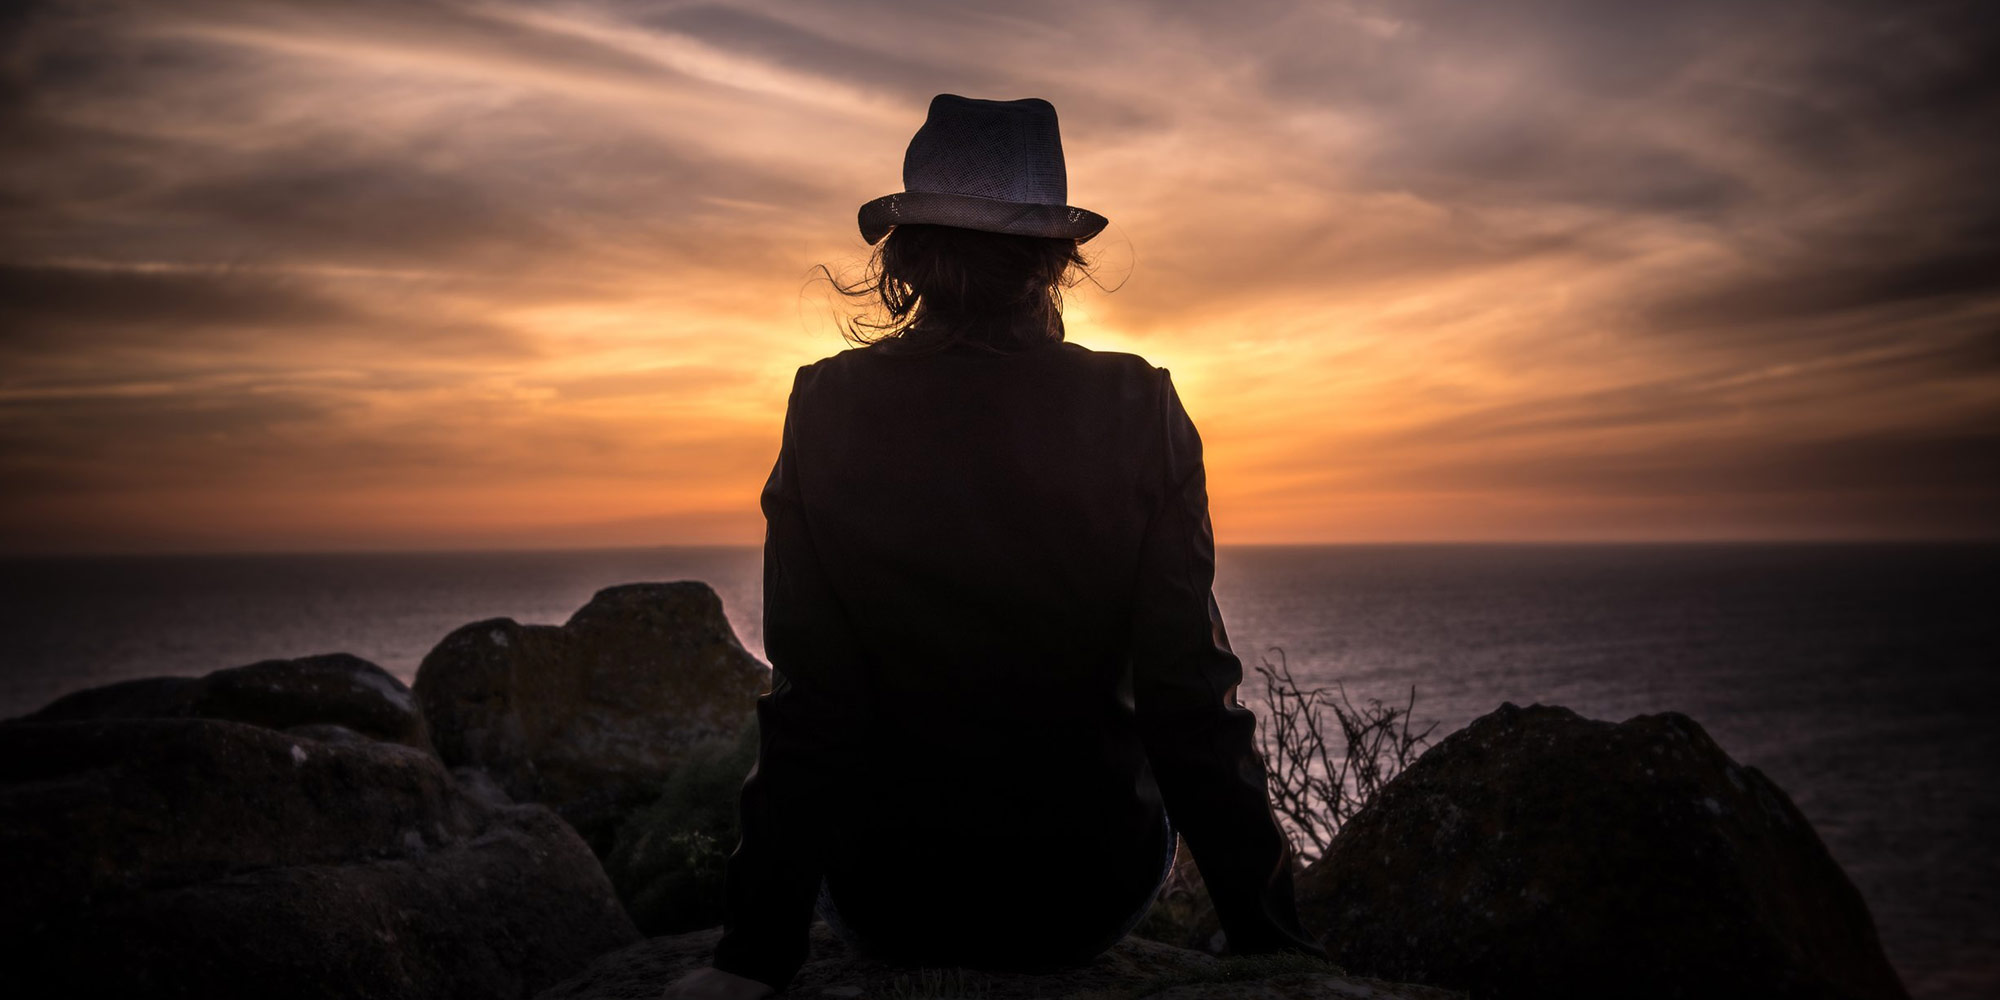 Rear view of a shadowed image. A woman in a hat stares out at the sunset.